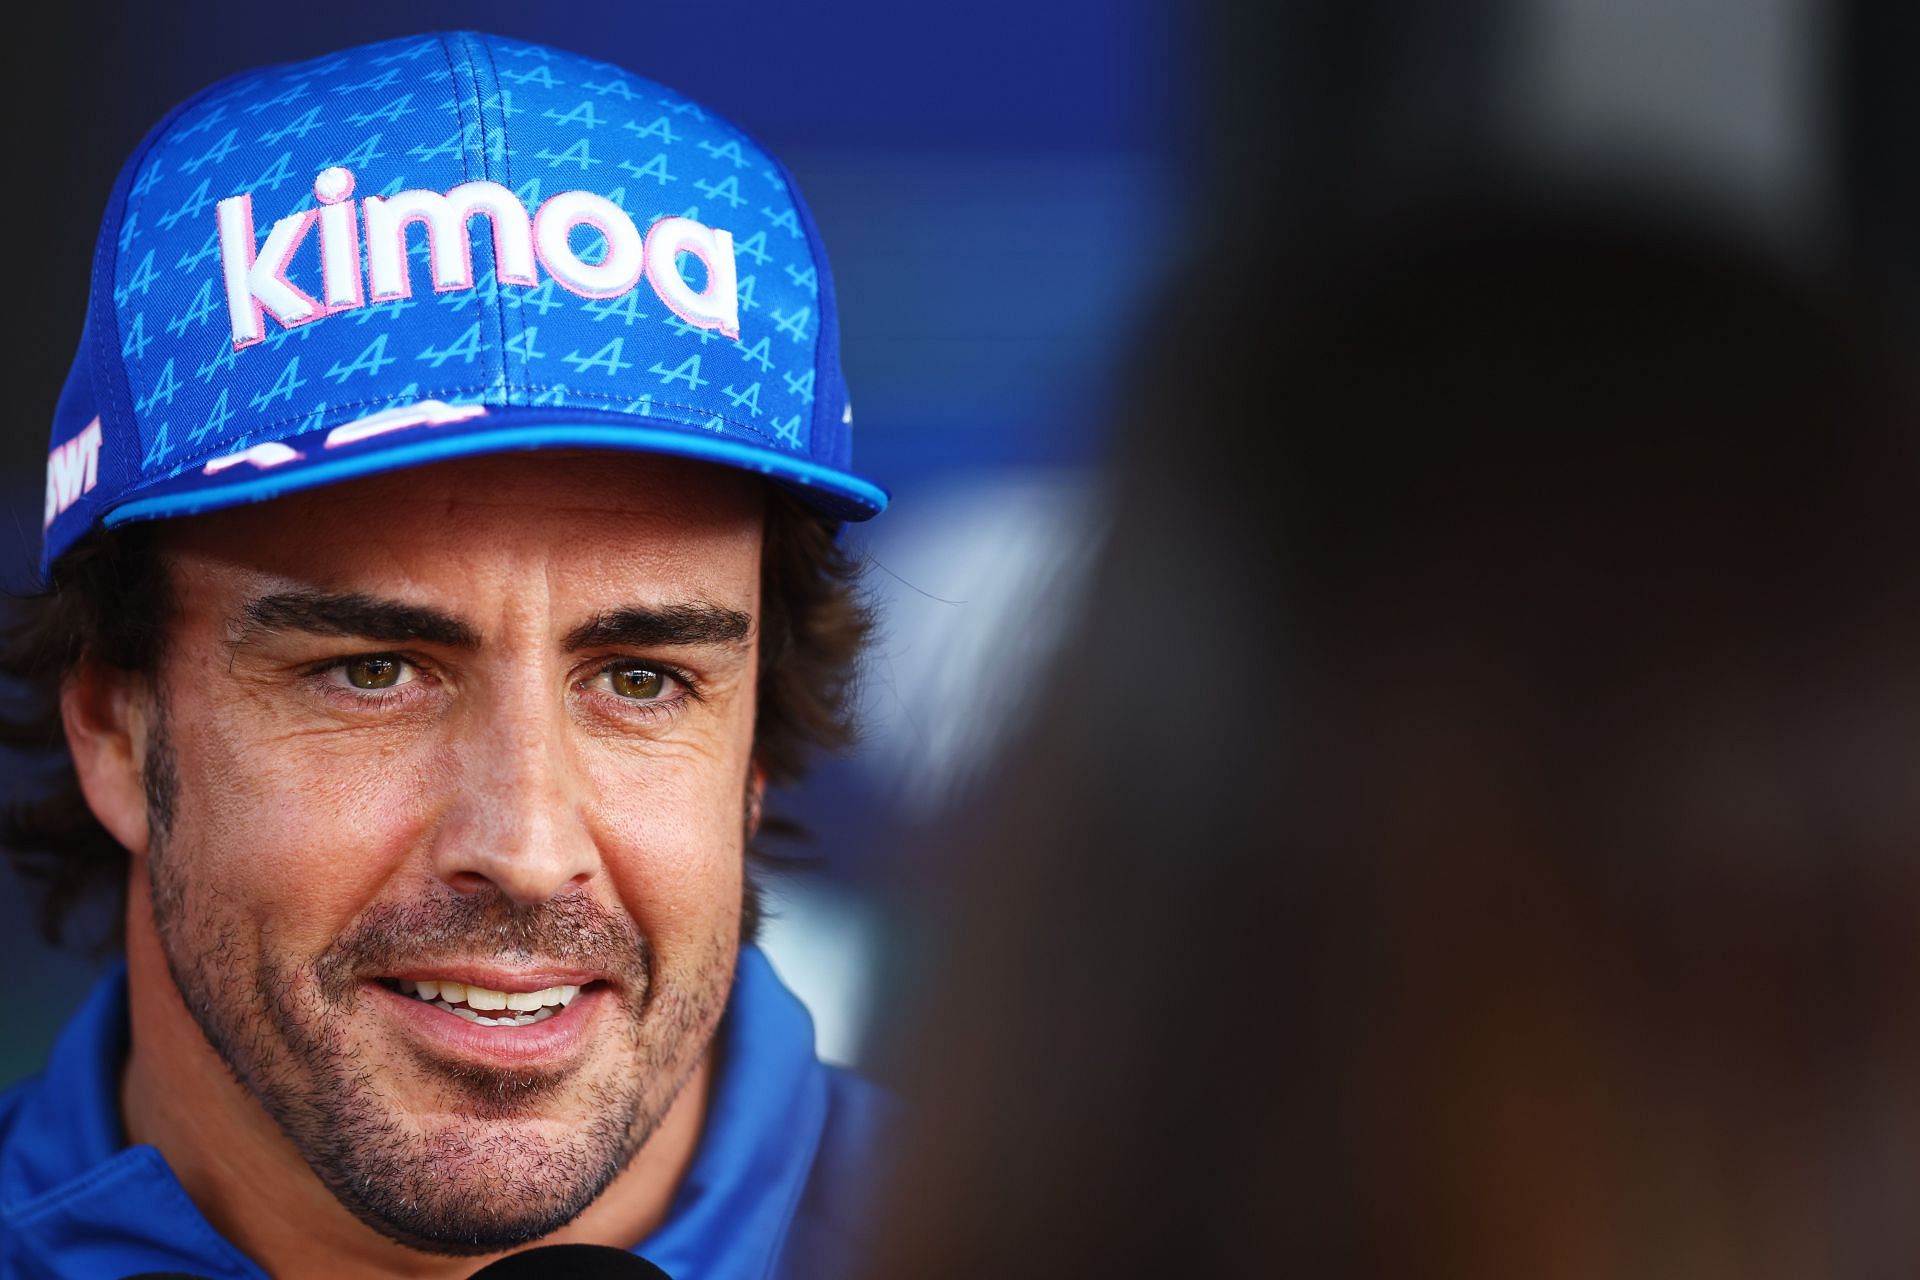 Fernando Alonso in the Paddock during previews ahead of the F1 Grand Prix of Hungary at Hungaroring on July 28, 2022, in Budapest, Hungary (Photo by Francois Nel/Getty Images)